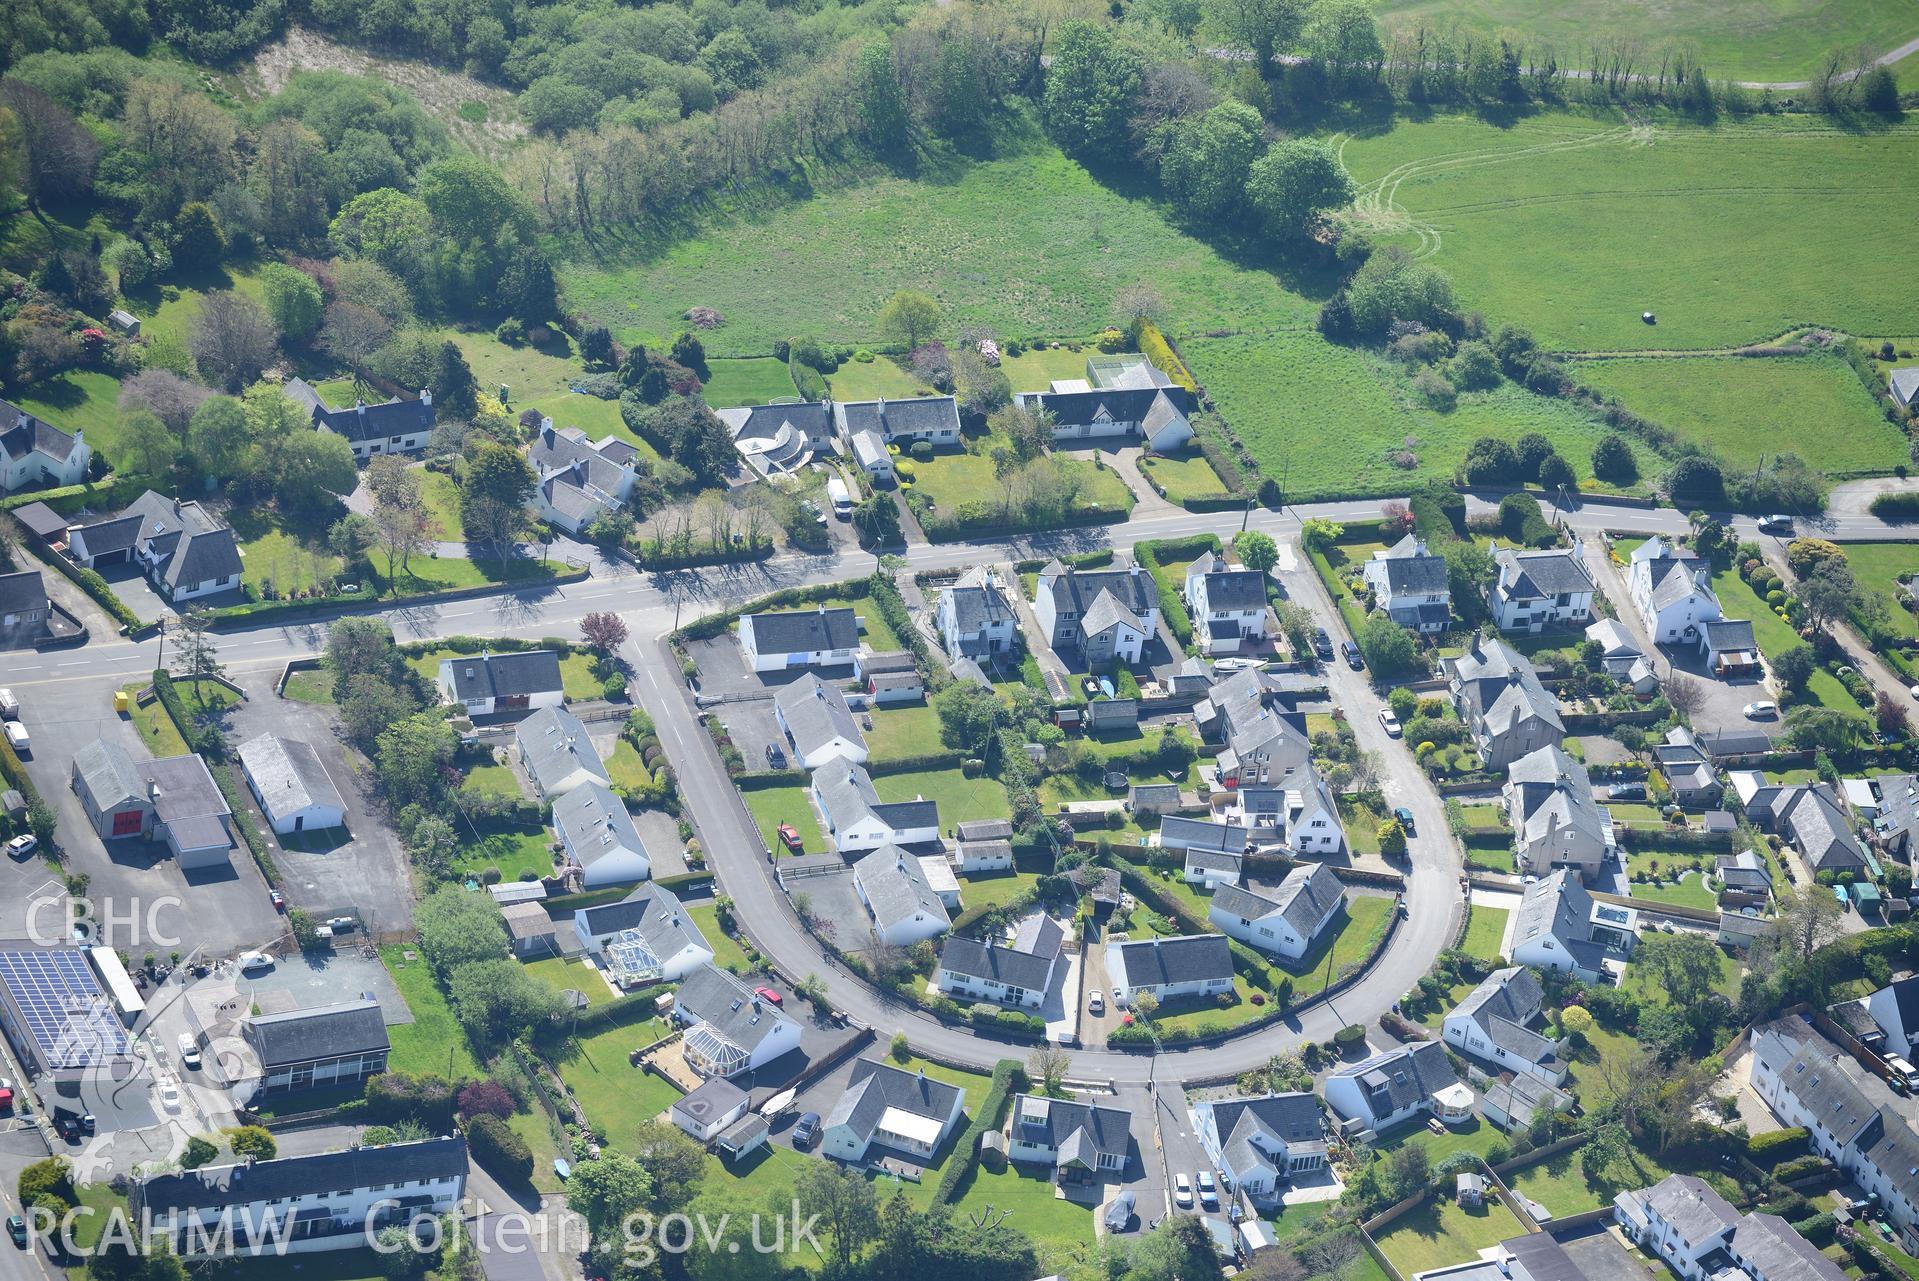 Aerial photography of Abersoch taken on 3rd May 2017.  Baseline aerial reconnaissance survey for the CHERISH Project. ? Crown: CHERISH PROJECT 2017. Produced with EU funds through the Ireland Wales Co-operation Programme 2014-2020. All material made free